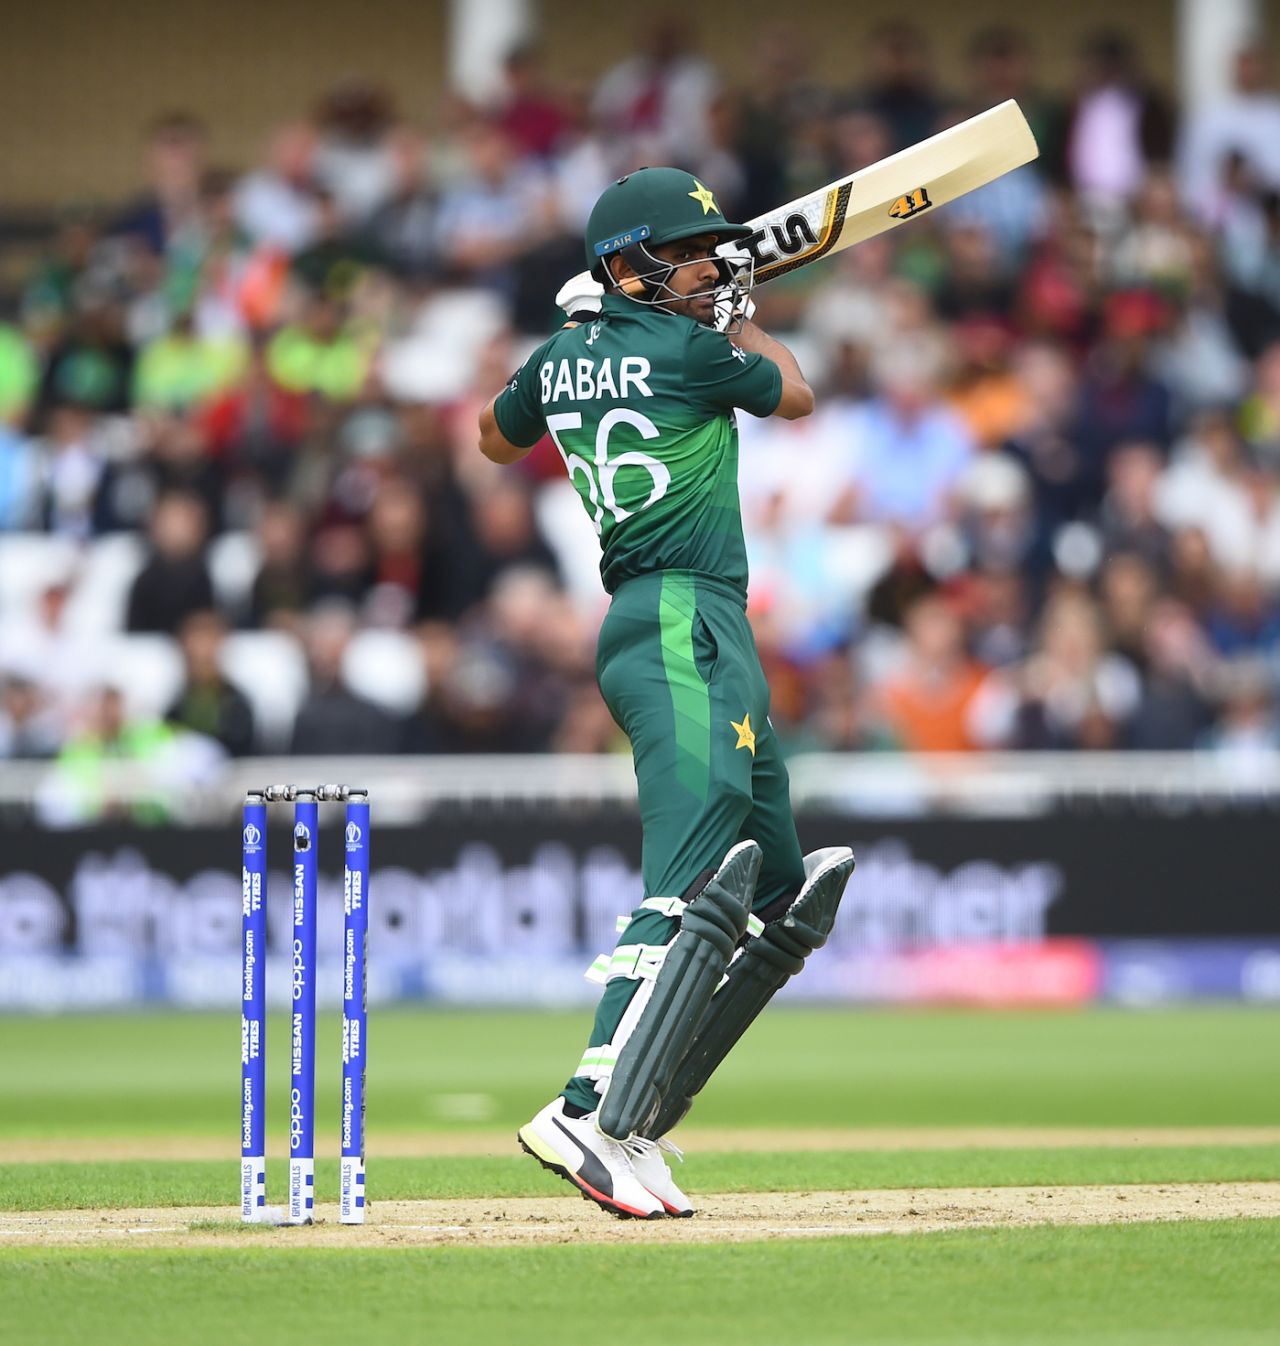 Babar Azam steers the ball away, Pakistan v West Indies, World Cup 2019, Trent Bridge, May 31, 2019